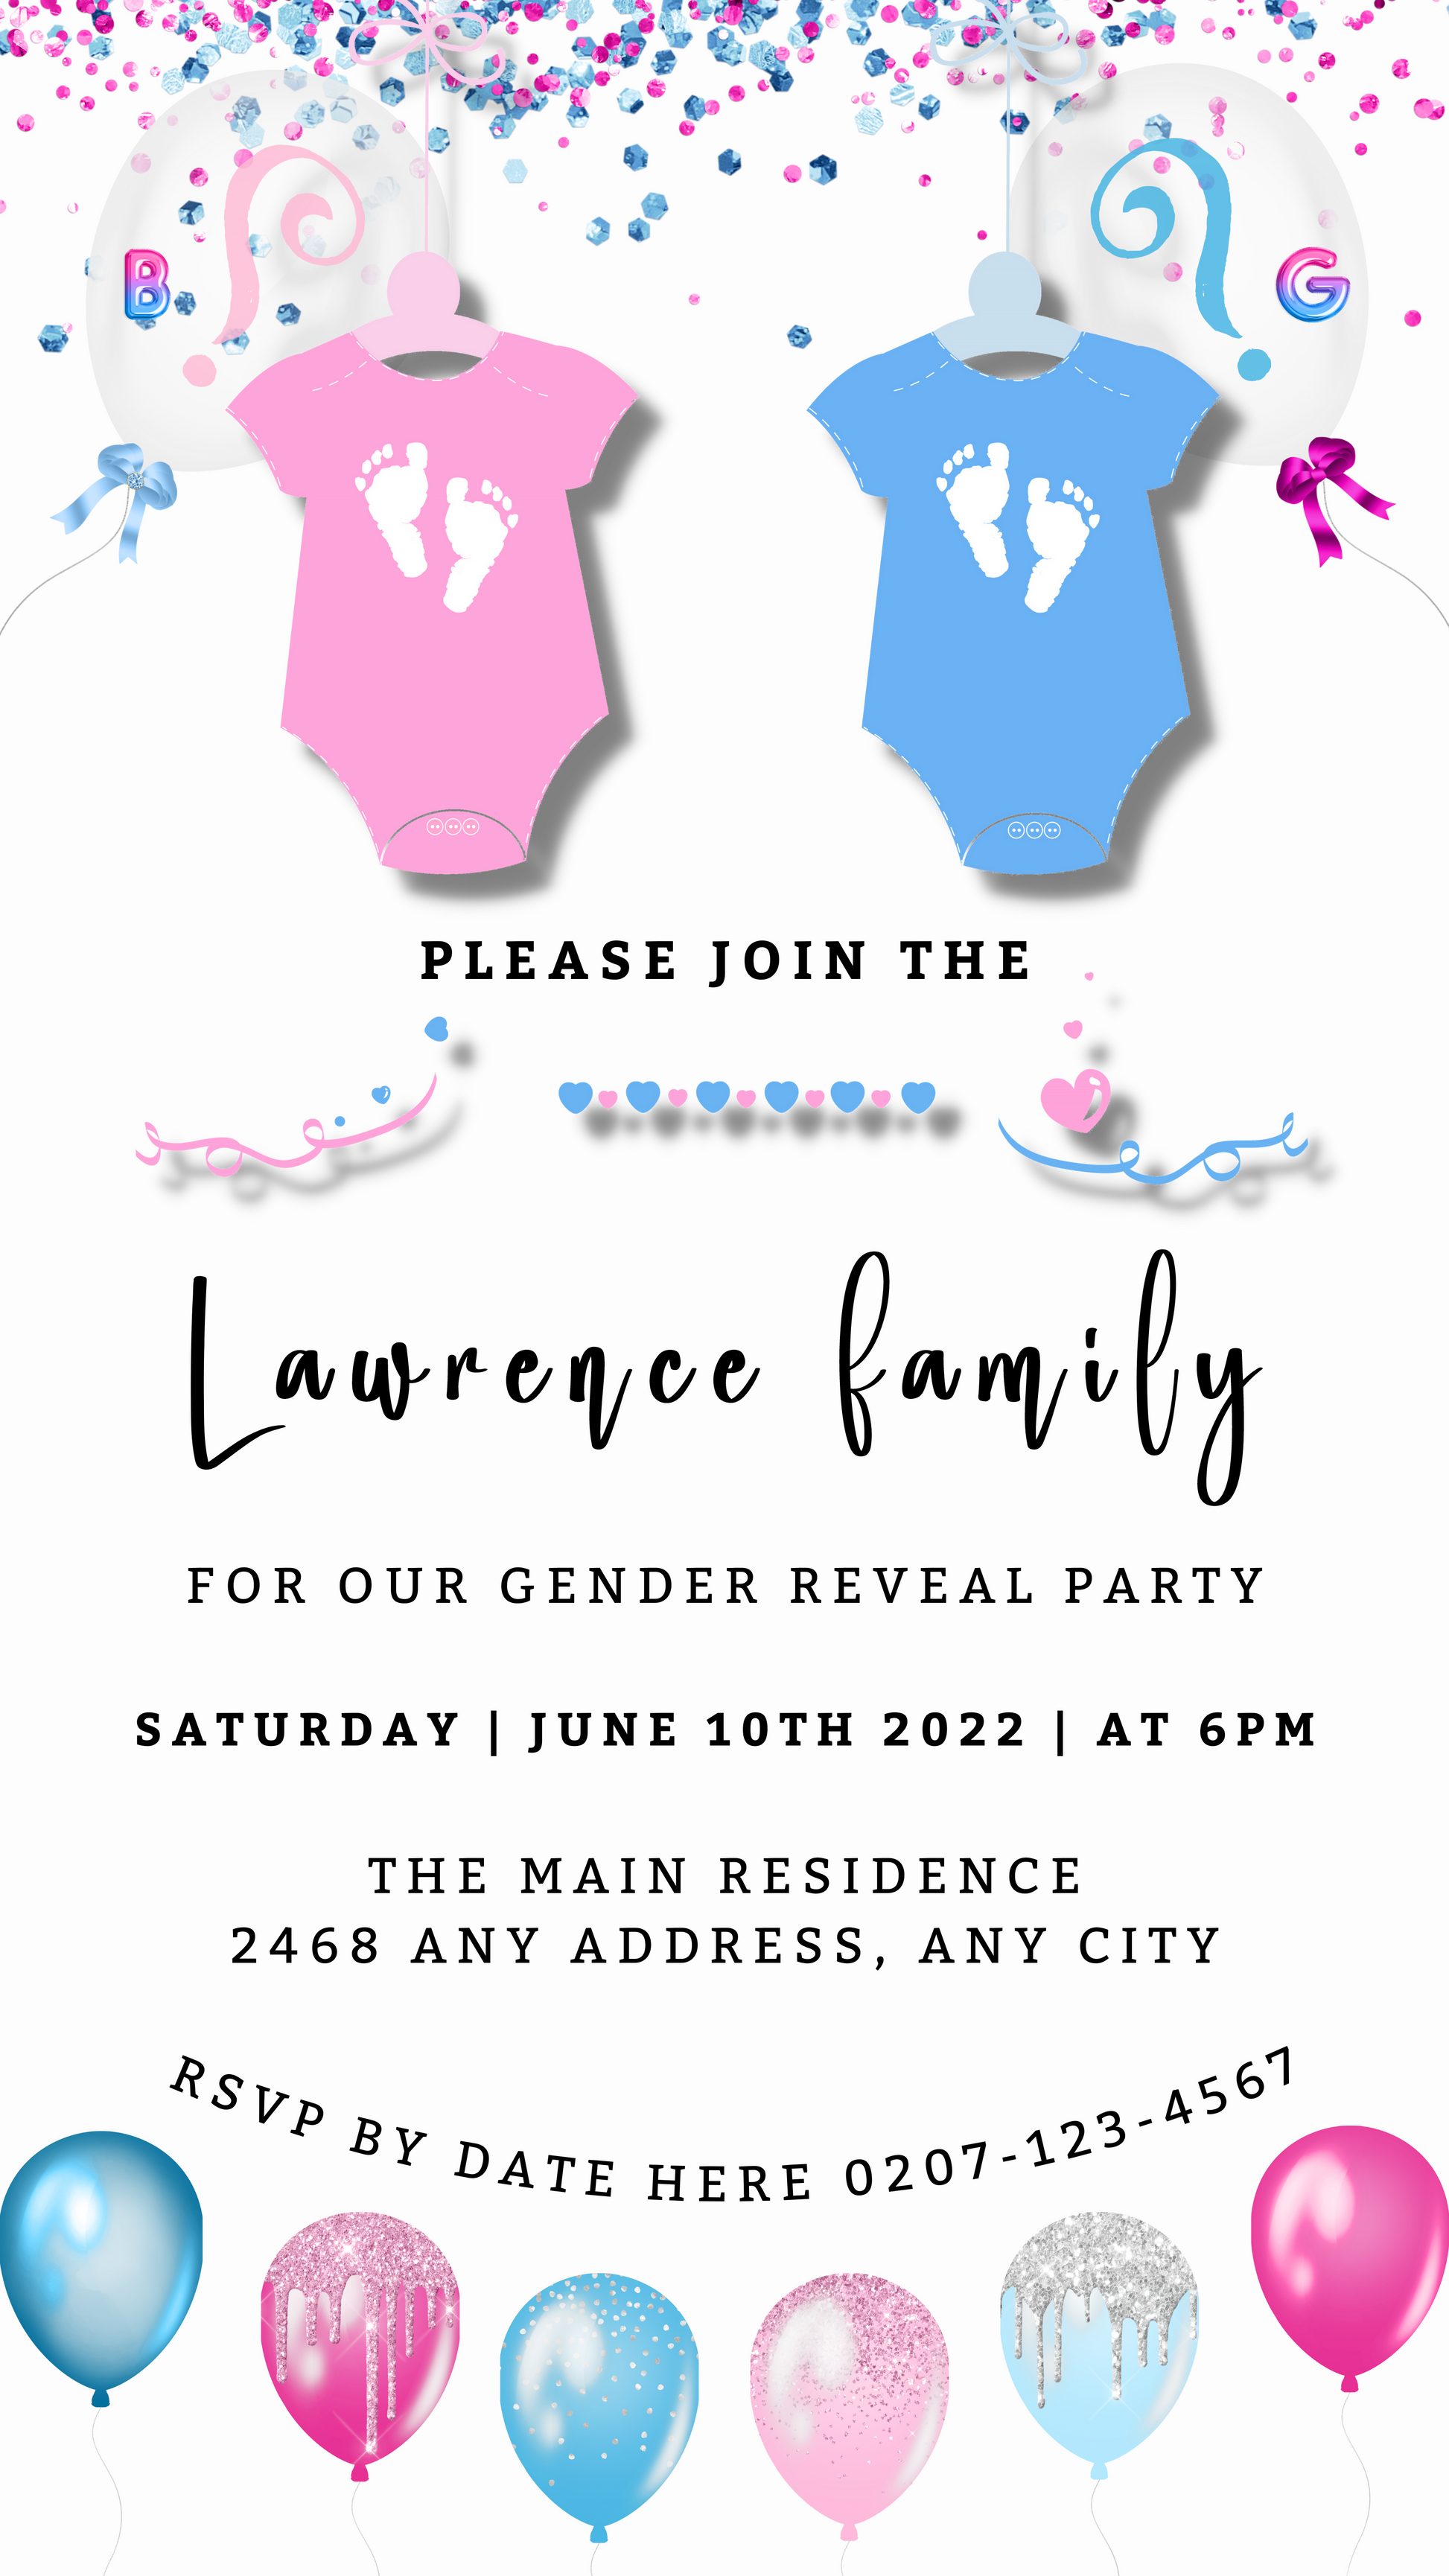 Customizable Baby Grow Blue Pink Confetti Gender Reveal Evite with pink and blue onesies and footprint designs, editable via Canva for digital invitations.